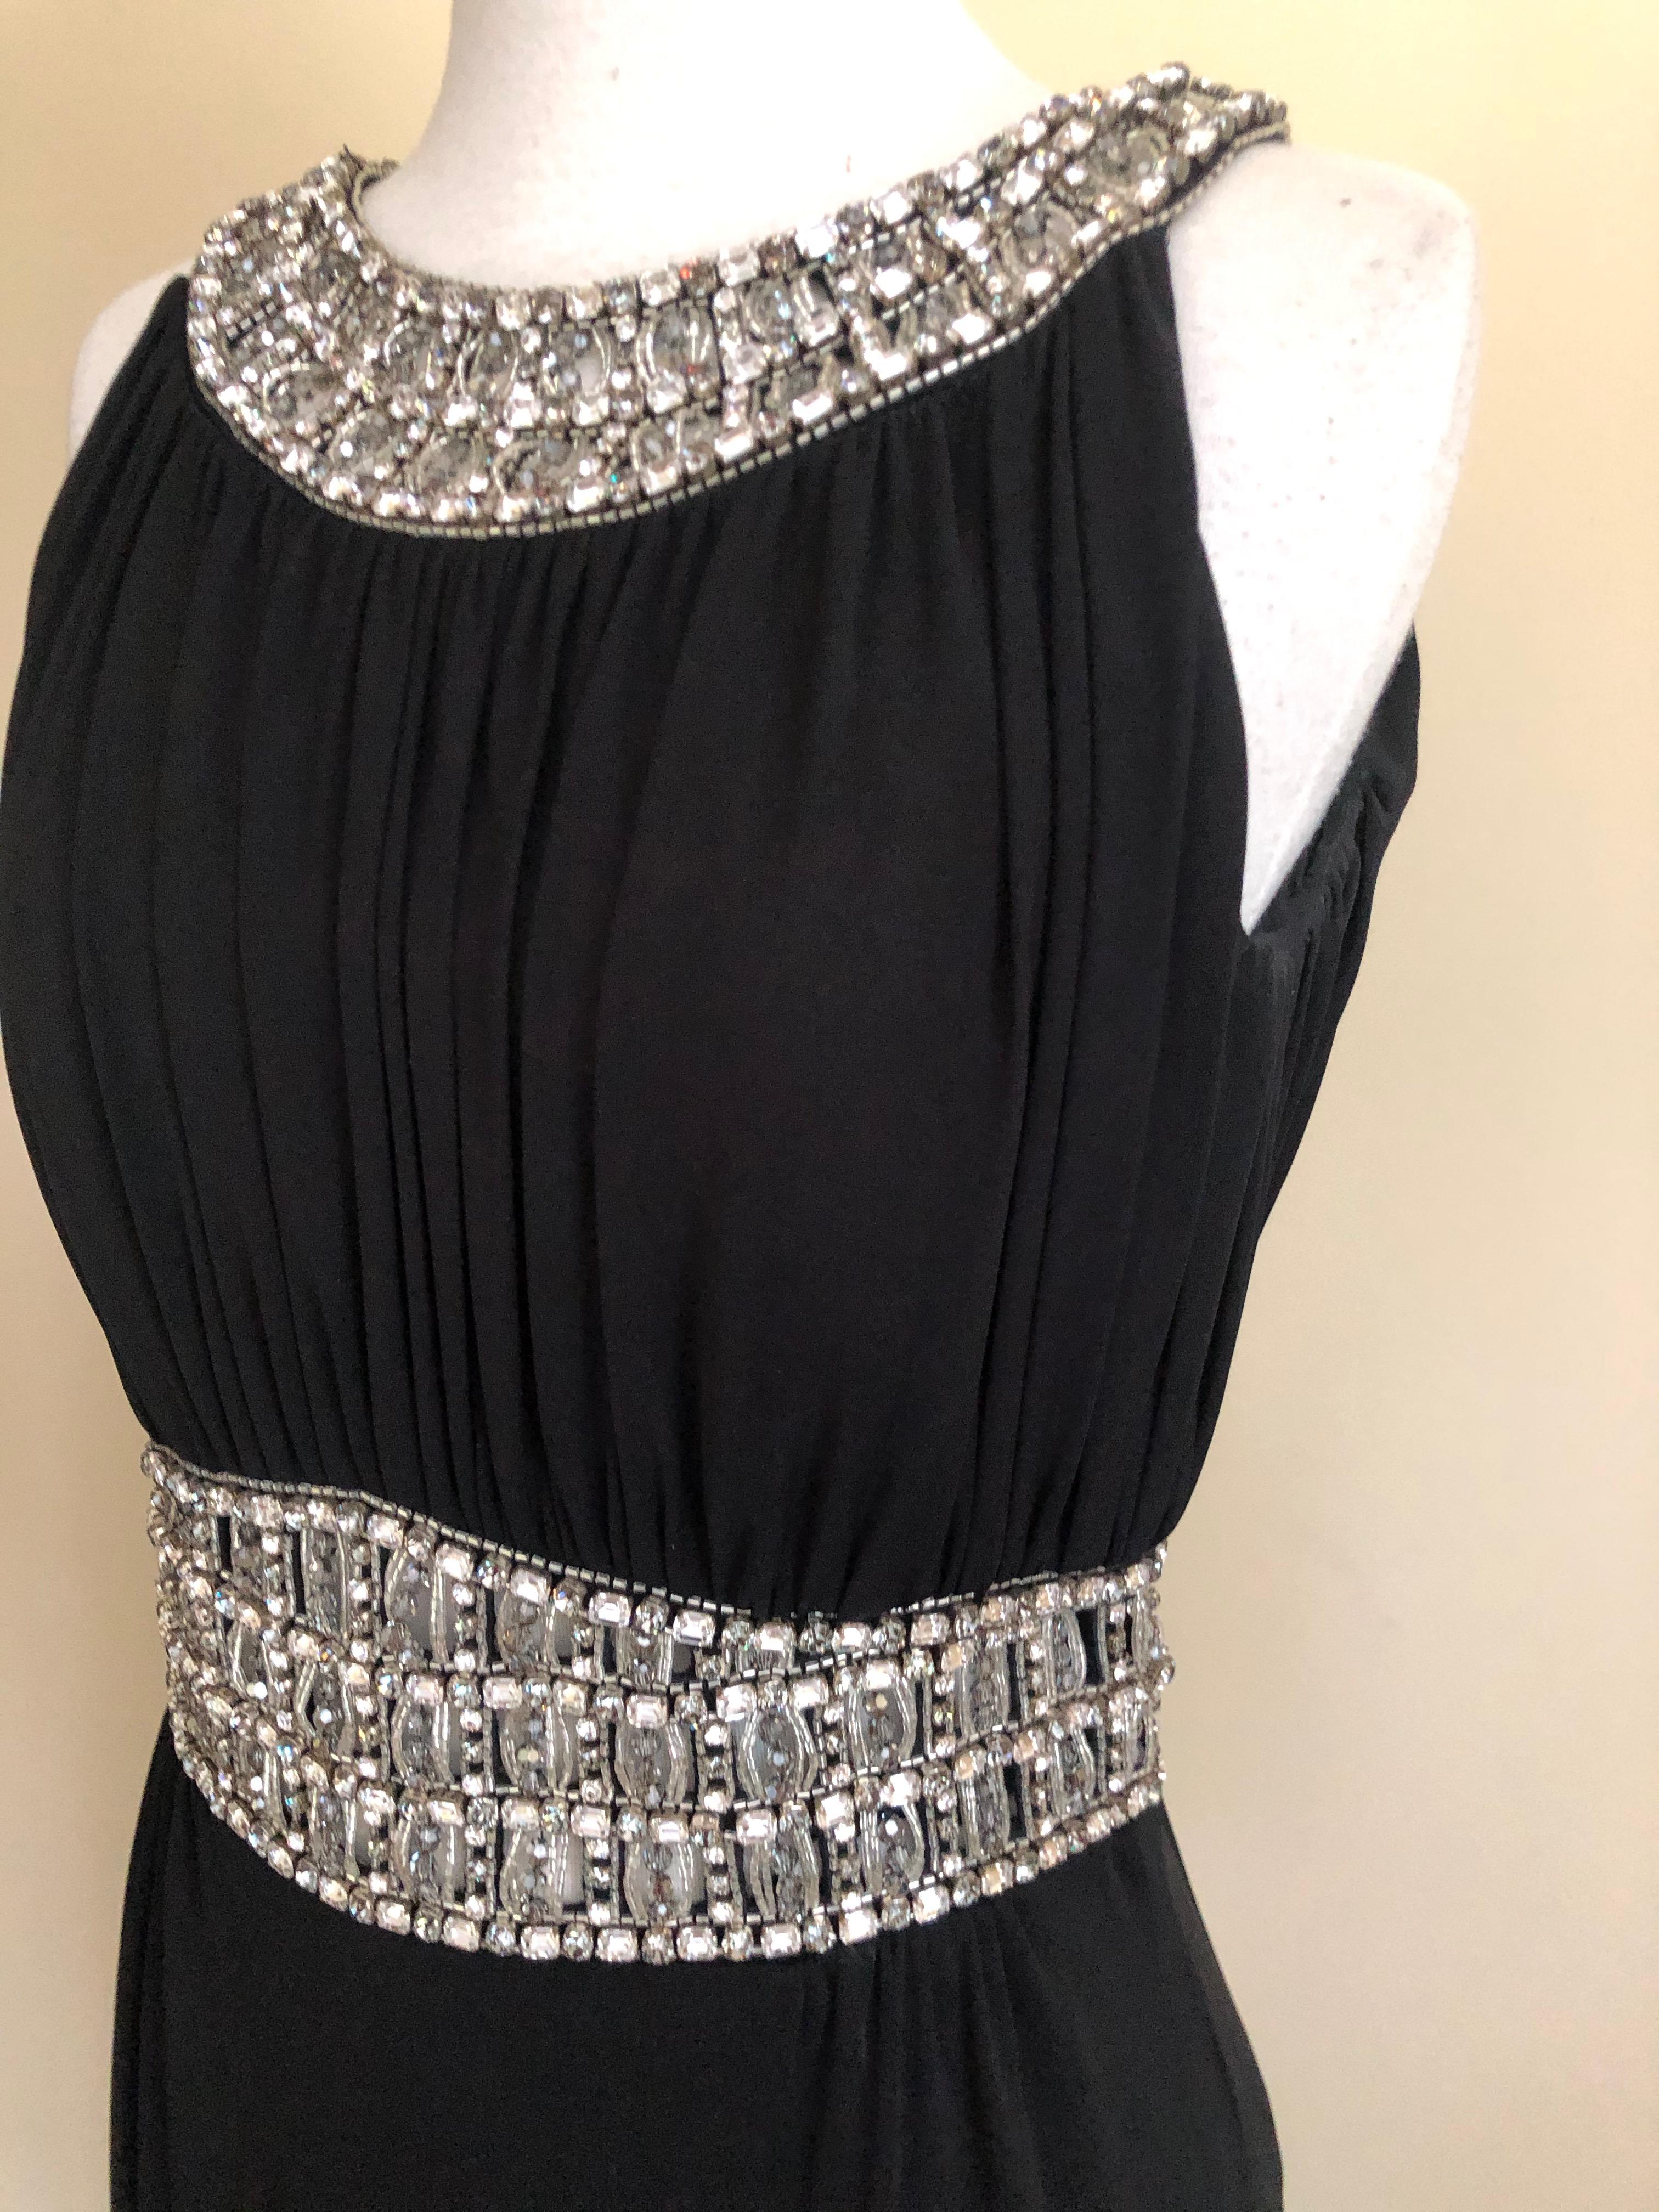 Azzaro Pleated Black Vintage Evening Dress with Jeweled Collar and Belt For Sale 3